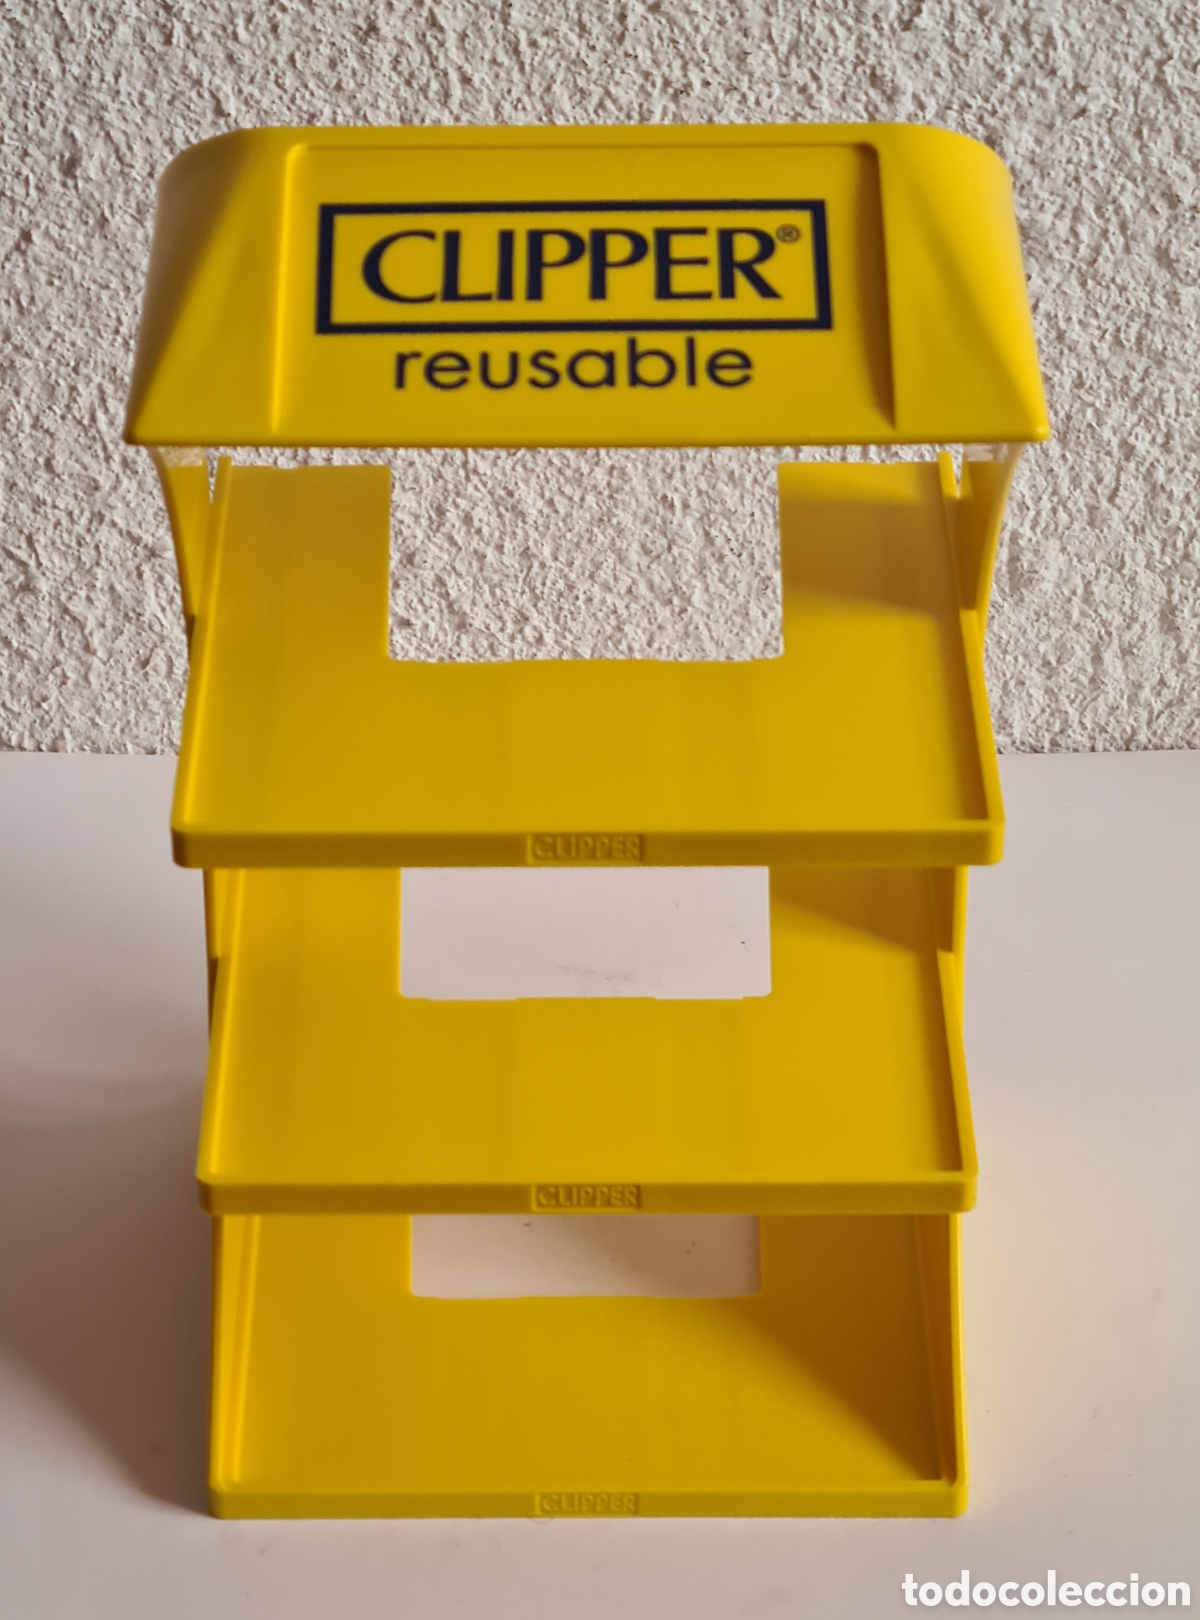 expositor display encendedor clipper reusable - - Buy Other collectible  objects on todocoleccion